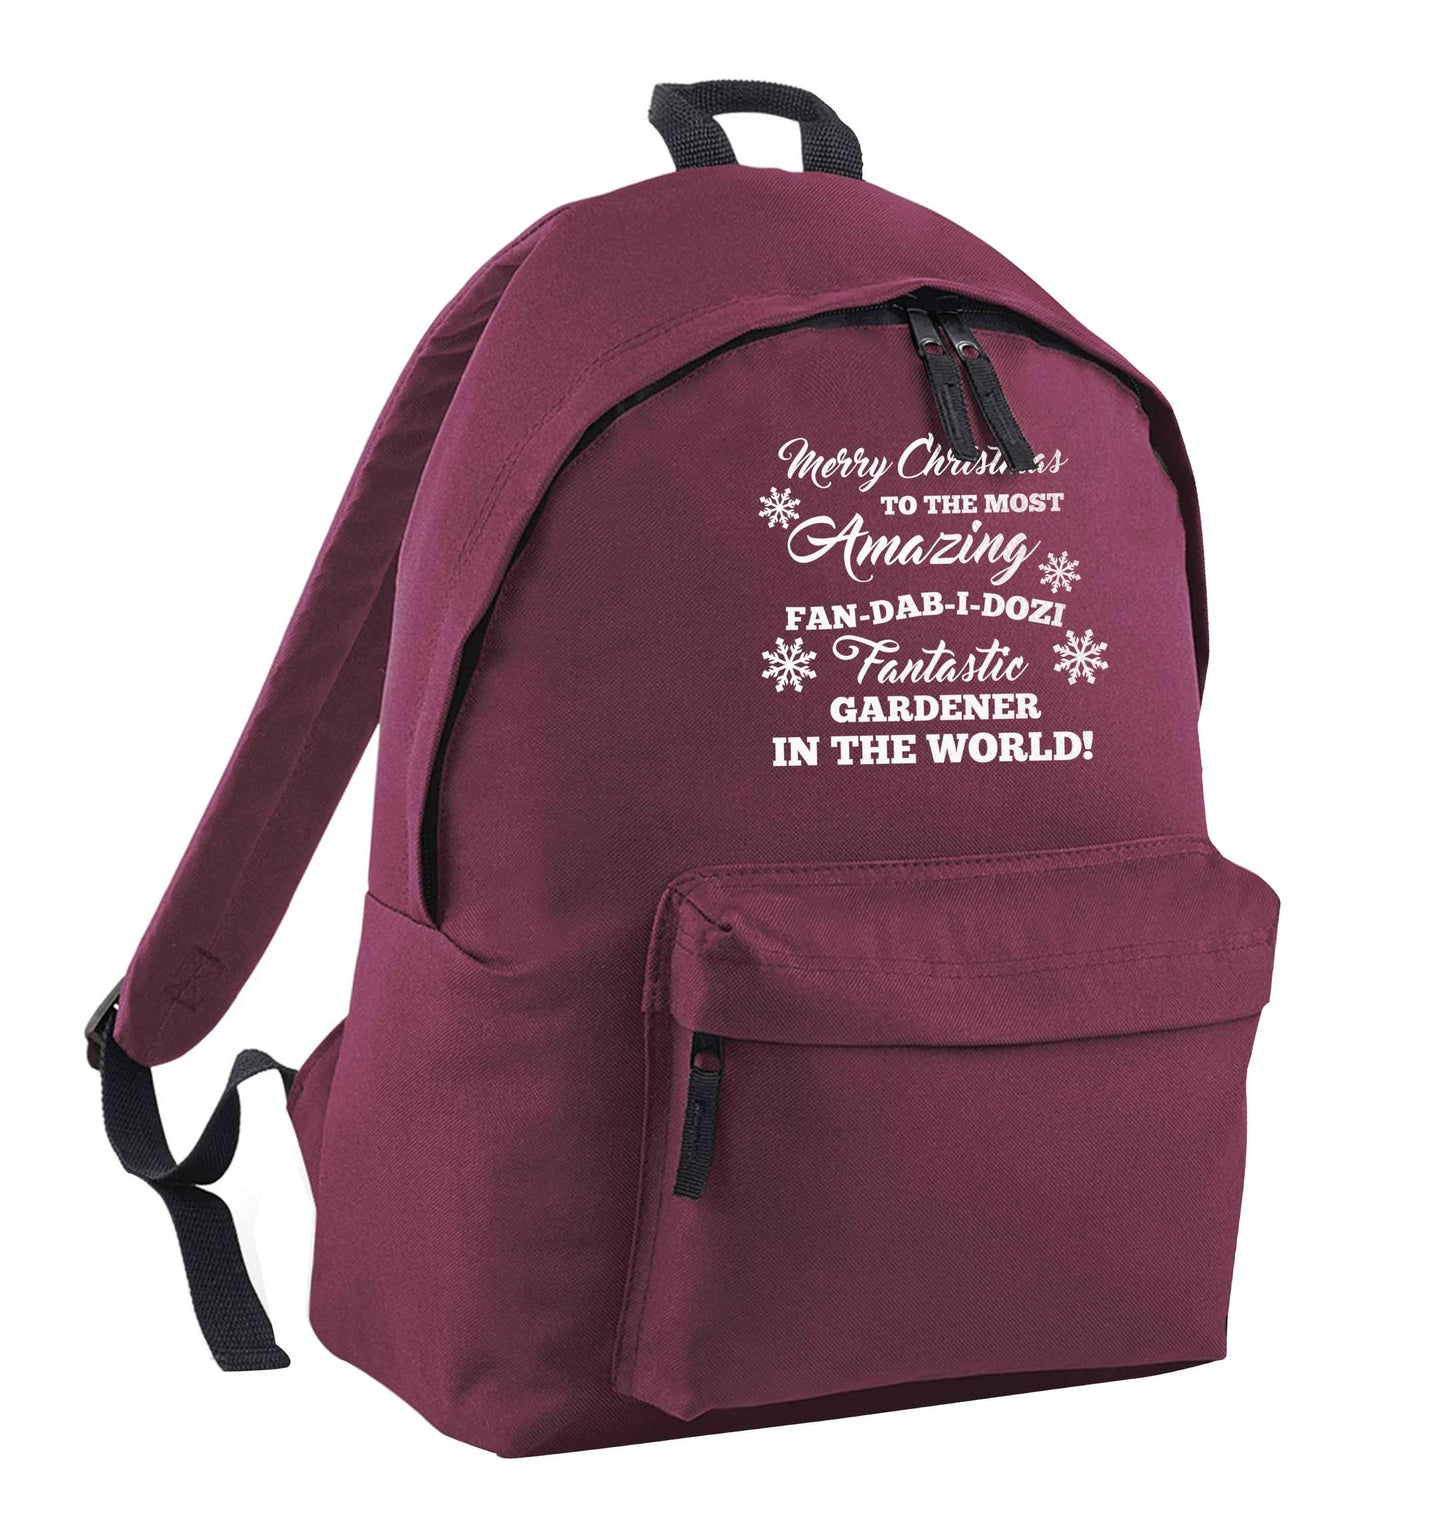 Merry Christmas to the most amazing gardener in the world! maroon adults backpack